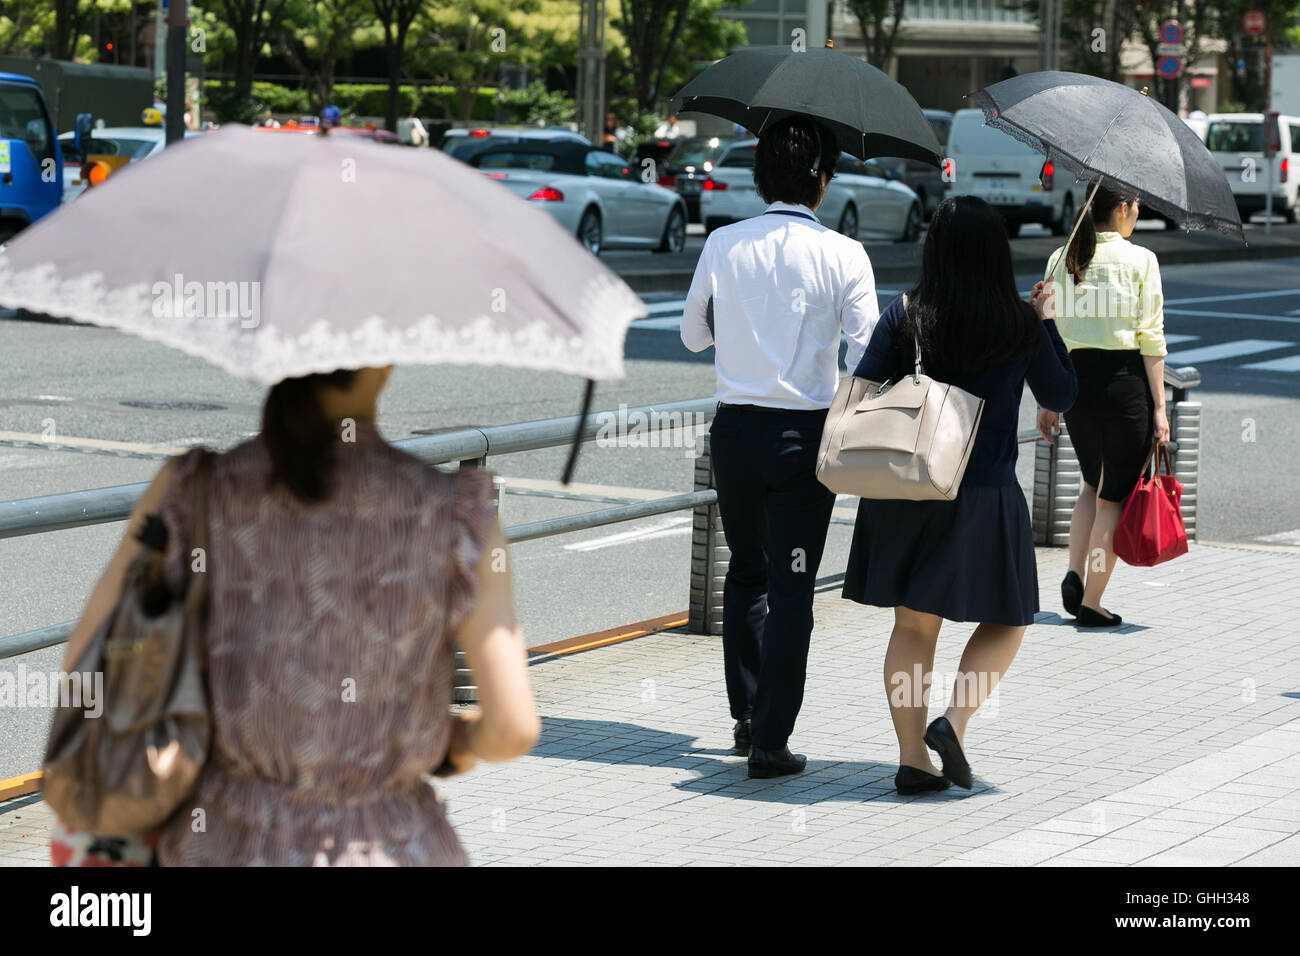 Pedestrians on a hot day in downtown Tokyo on August 5, 2016, Tokyo, Japan. The Japan Meteorological Agency registered temperatures of 35C degrees in Tokyo, making this one of the hottest days of the year. The current heatwave is expected to bring hot days next week across country. The government issued heat stroke warnings because of the high temperatures. © Rodrigo Reyes Marin/AFLO/Alamy Live News Stock Photo